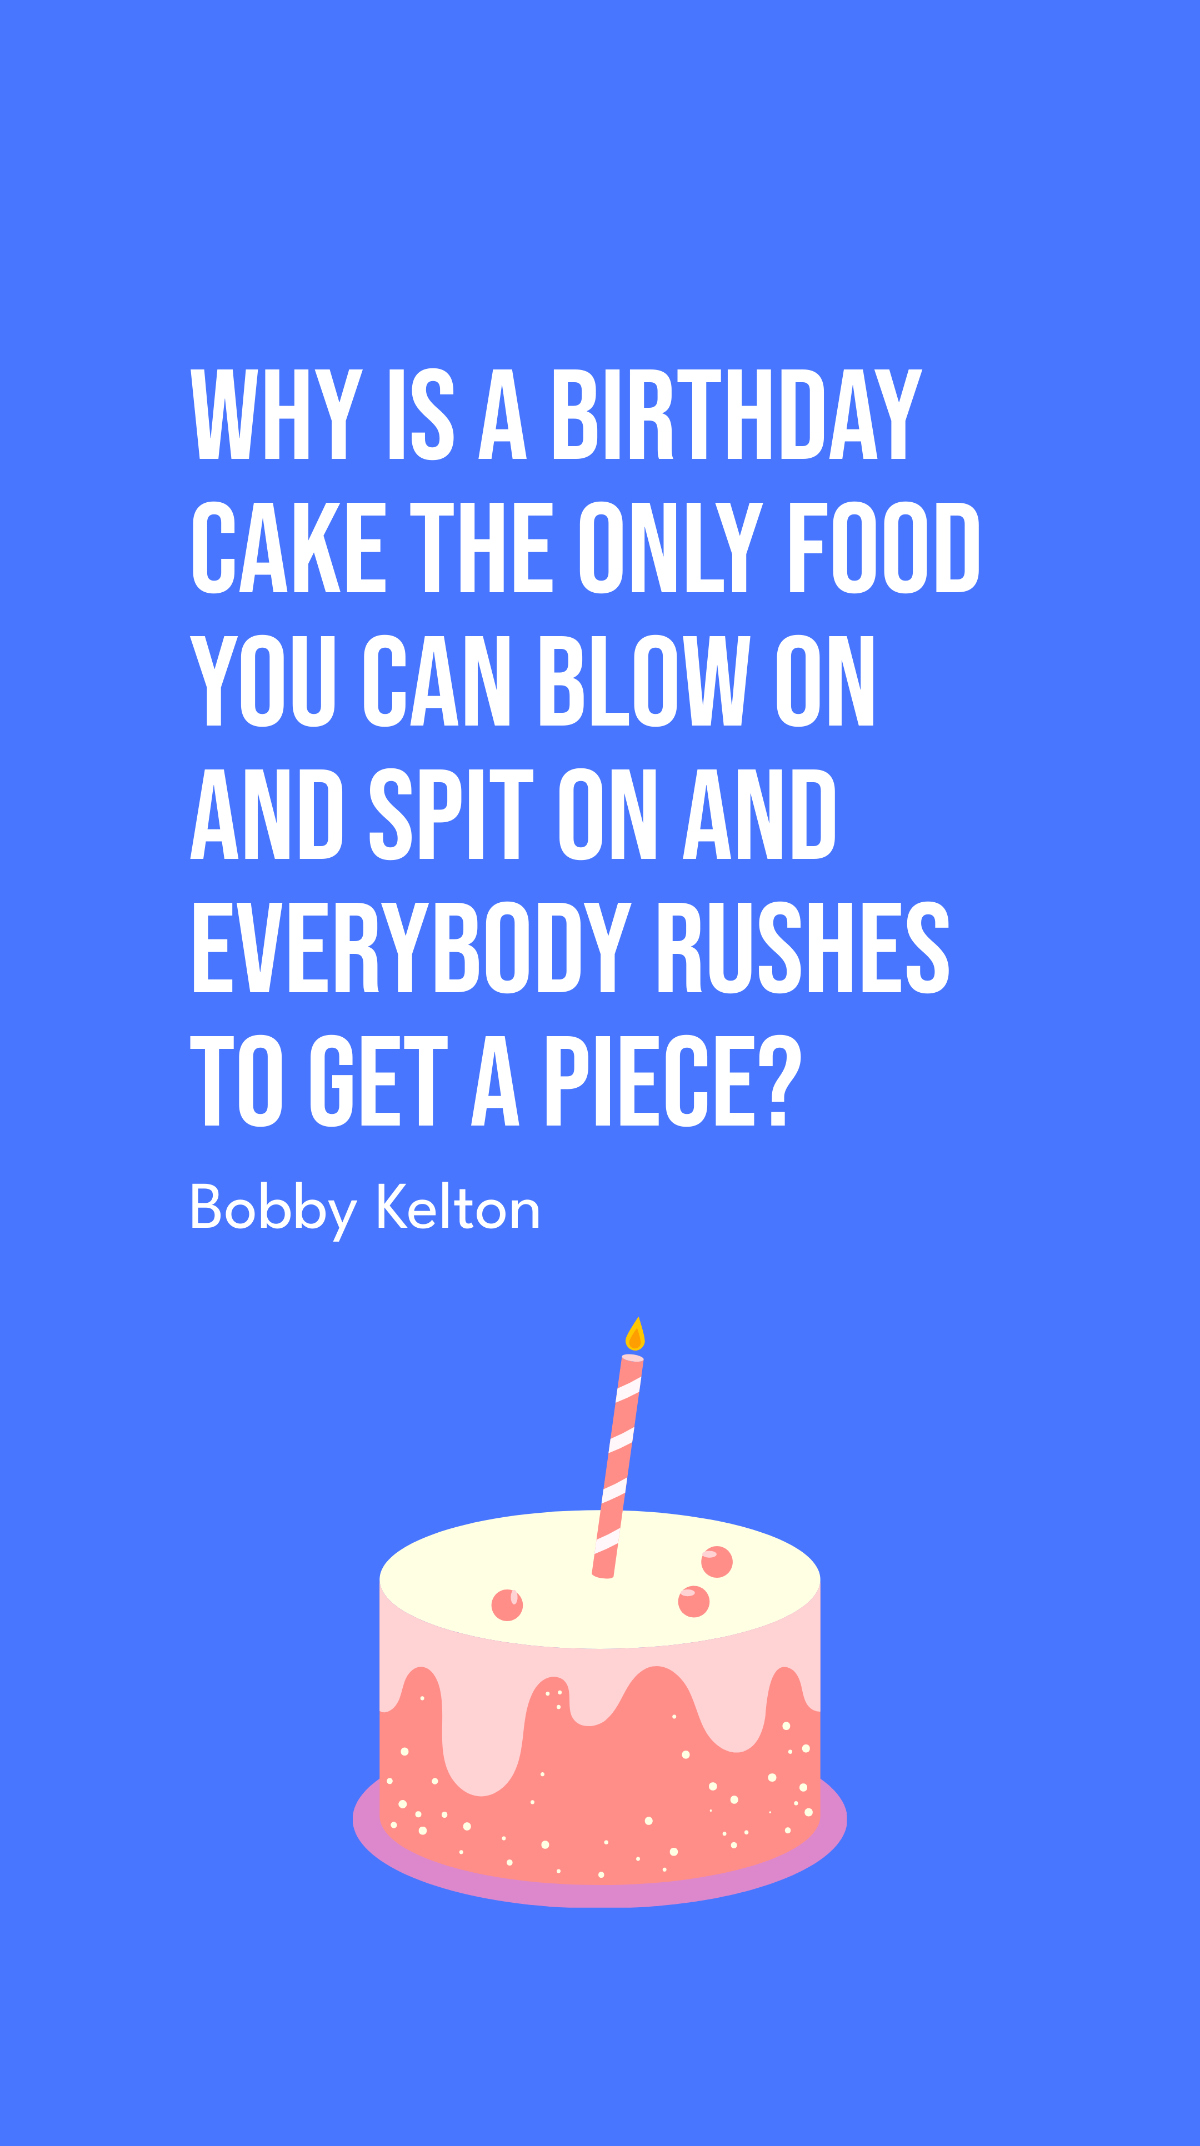 Bobby Kelton - Why is a birthday cake the only food you can blow on and spit on and everybody rushes to get a piece? Template